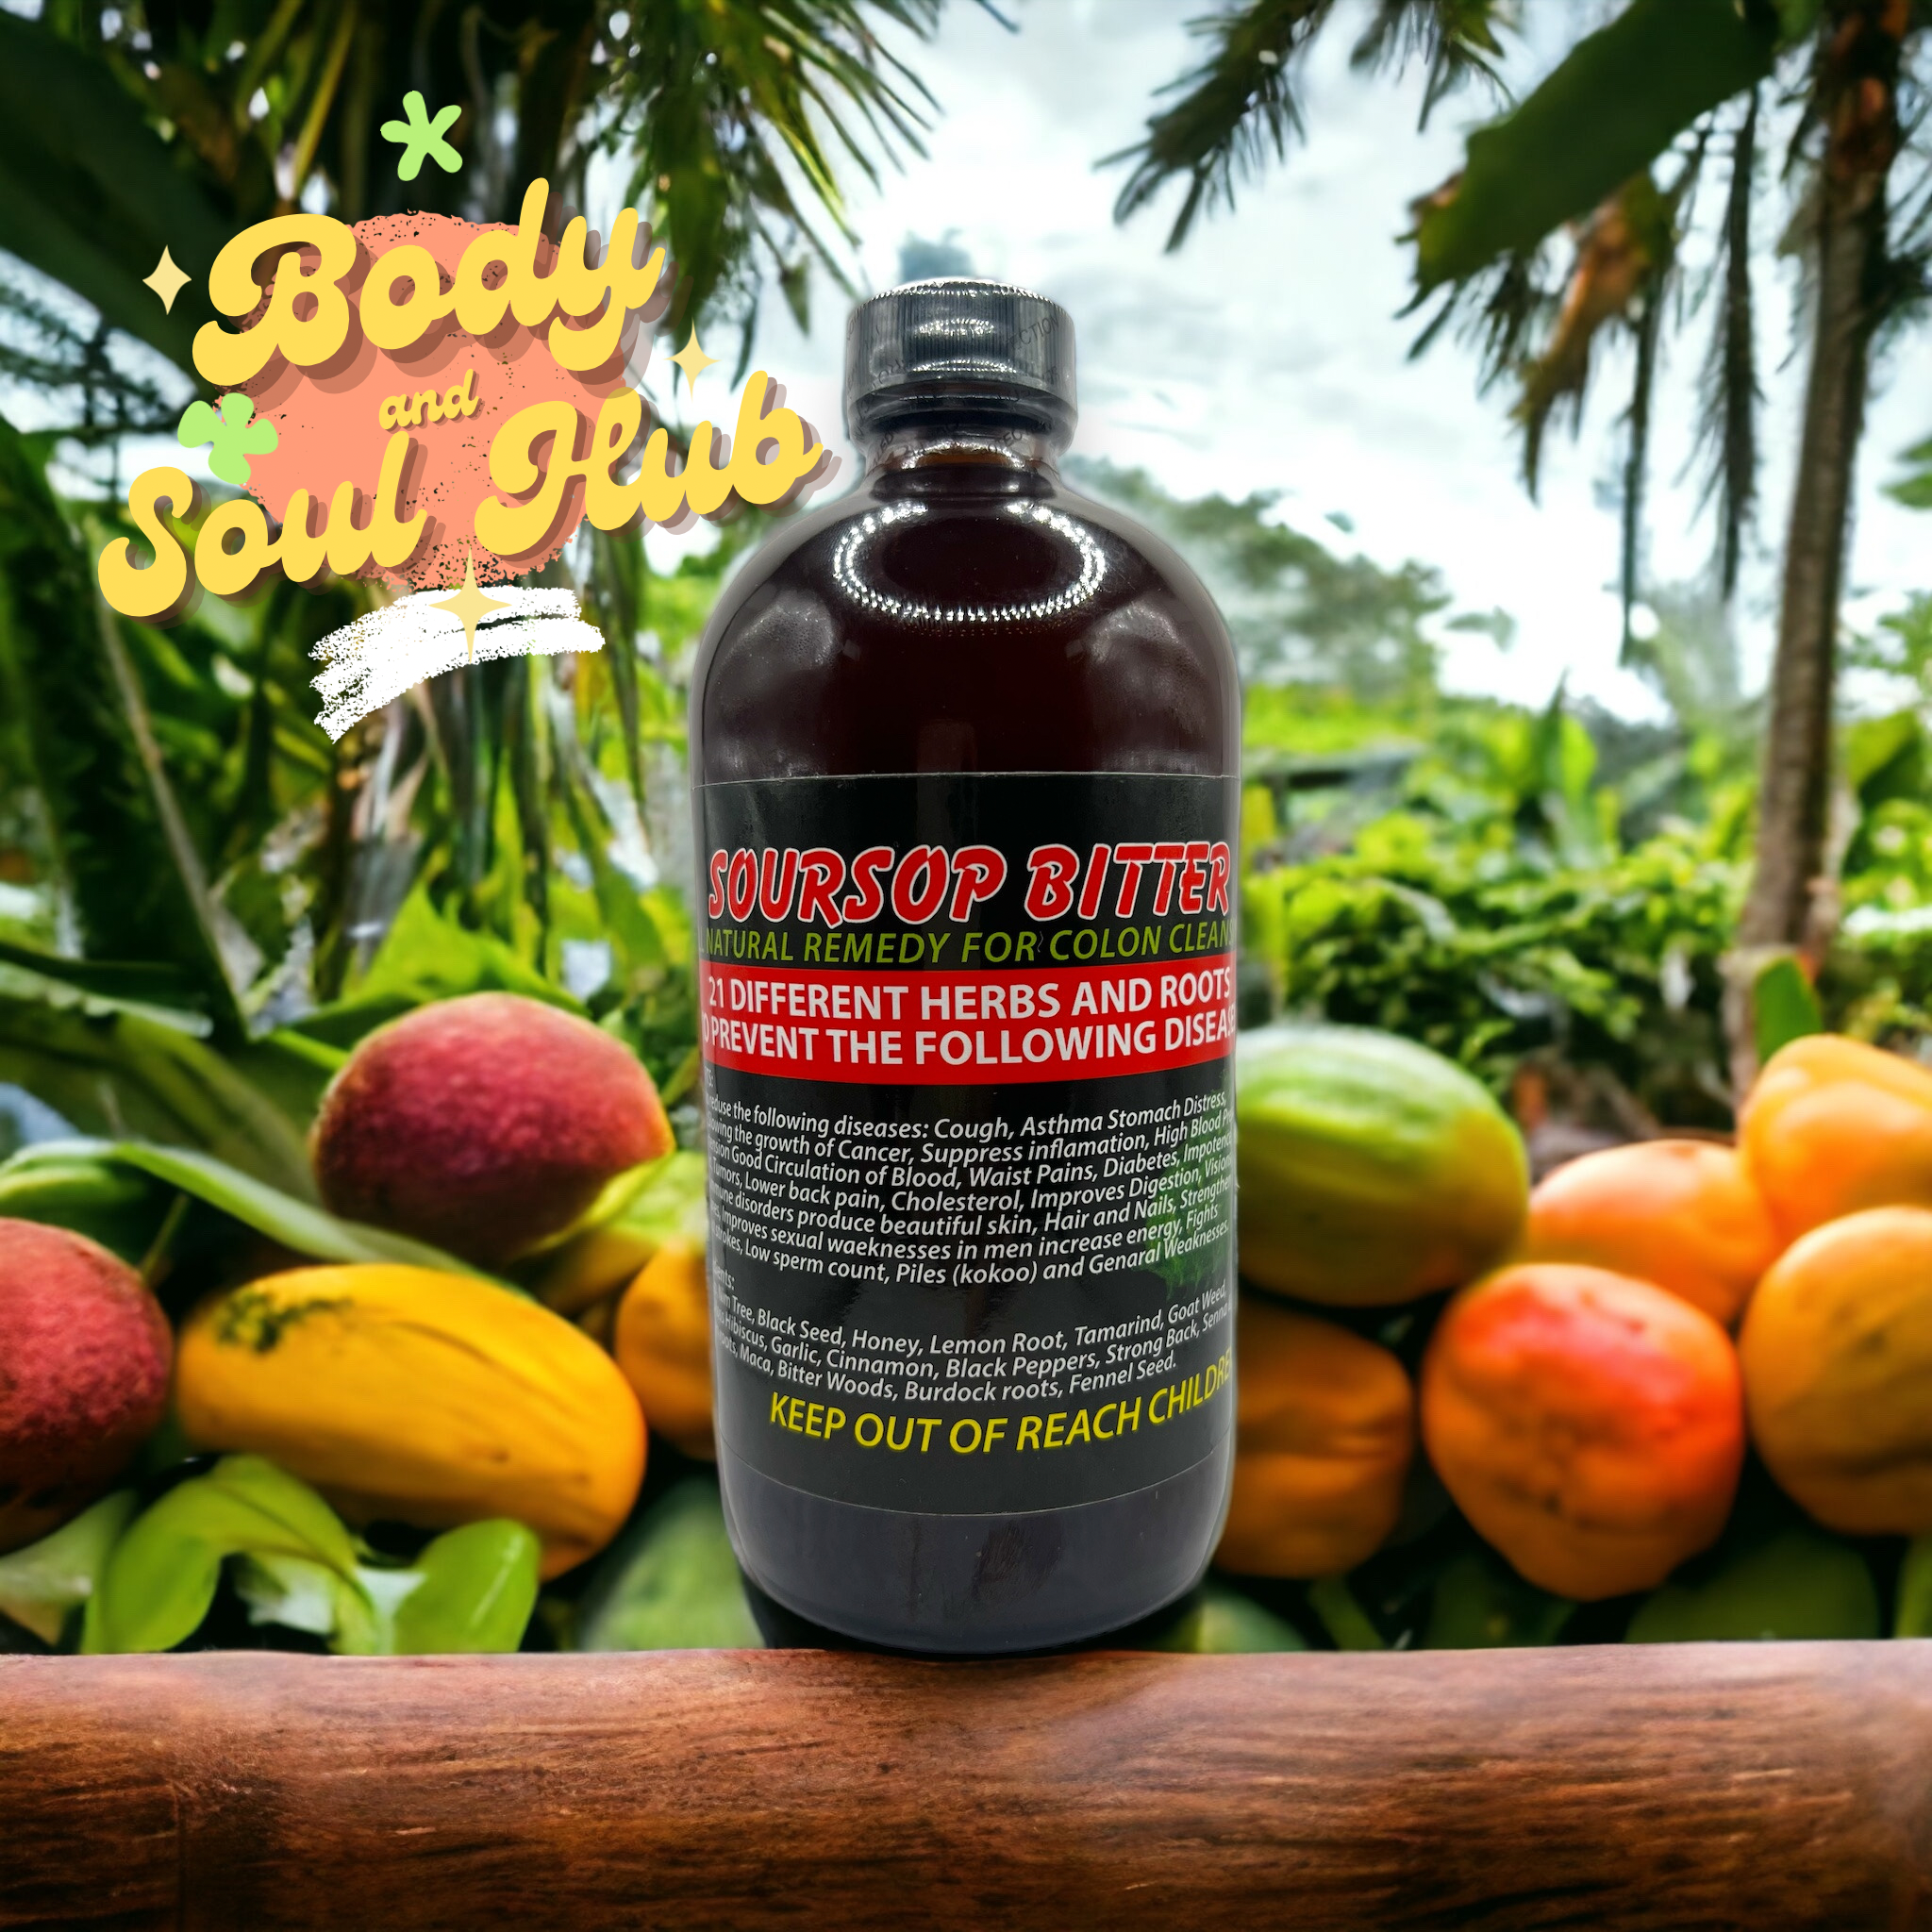 16 OZ Soursop Bitters 100% All Natural - African Herbs & Roots, Herbal Detox